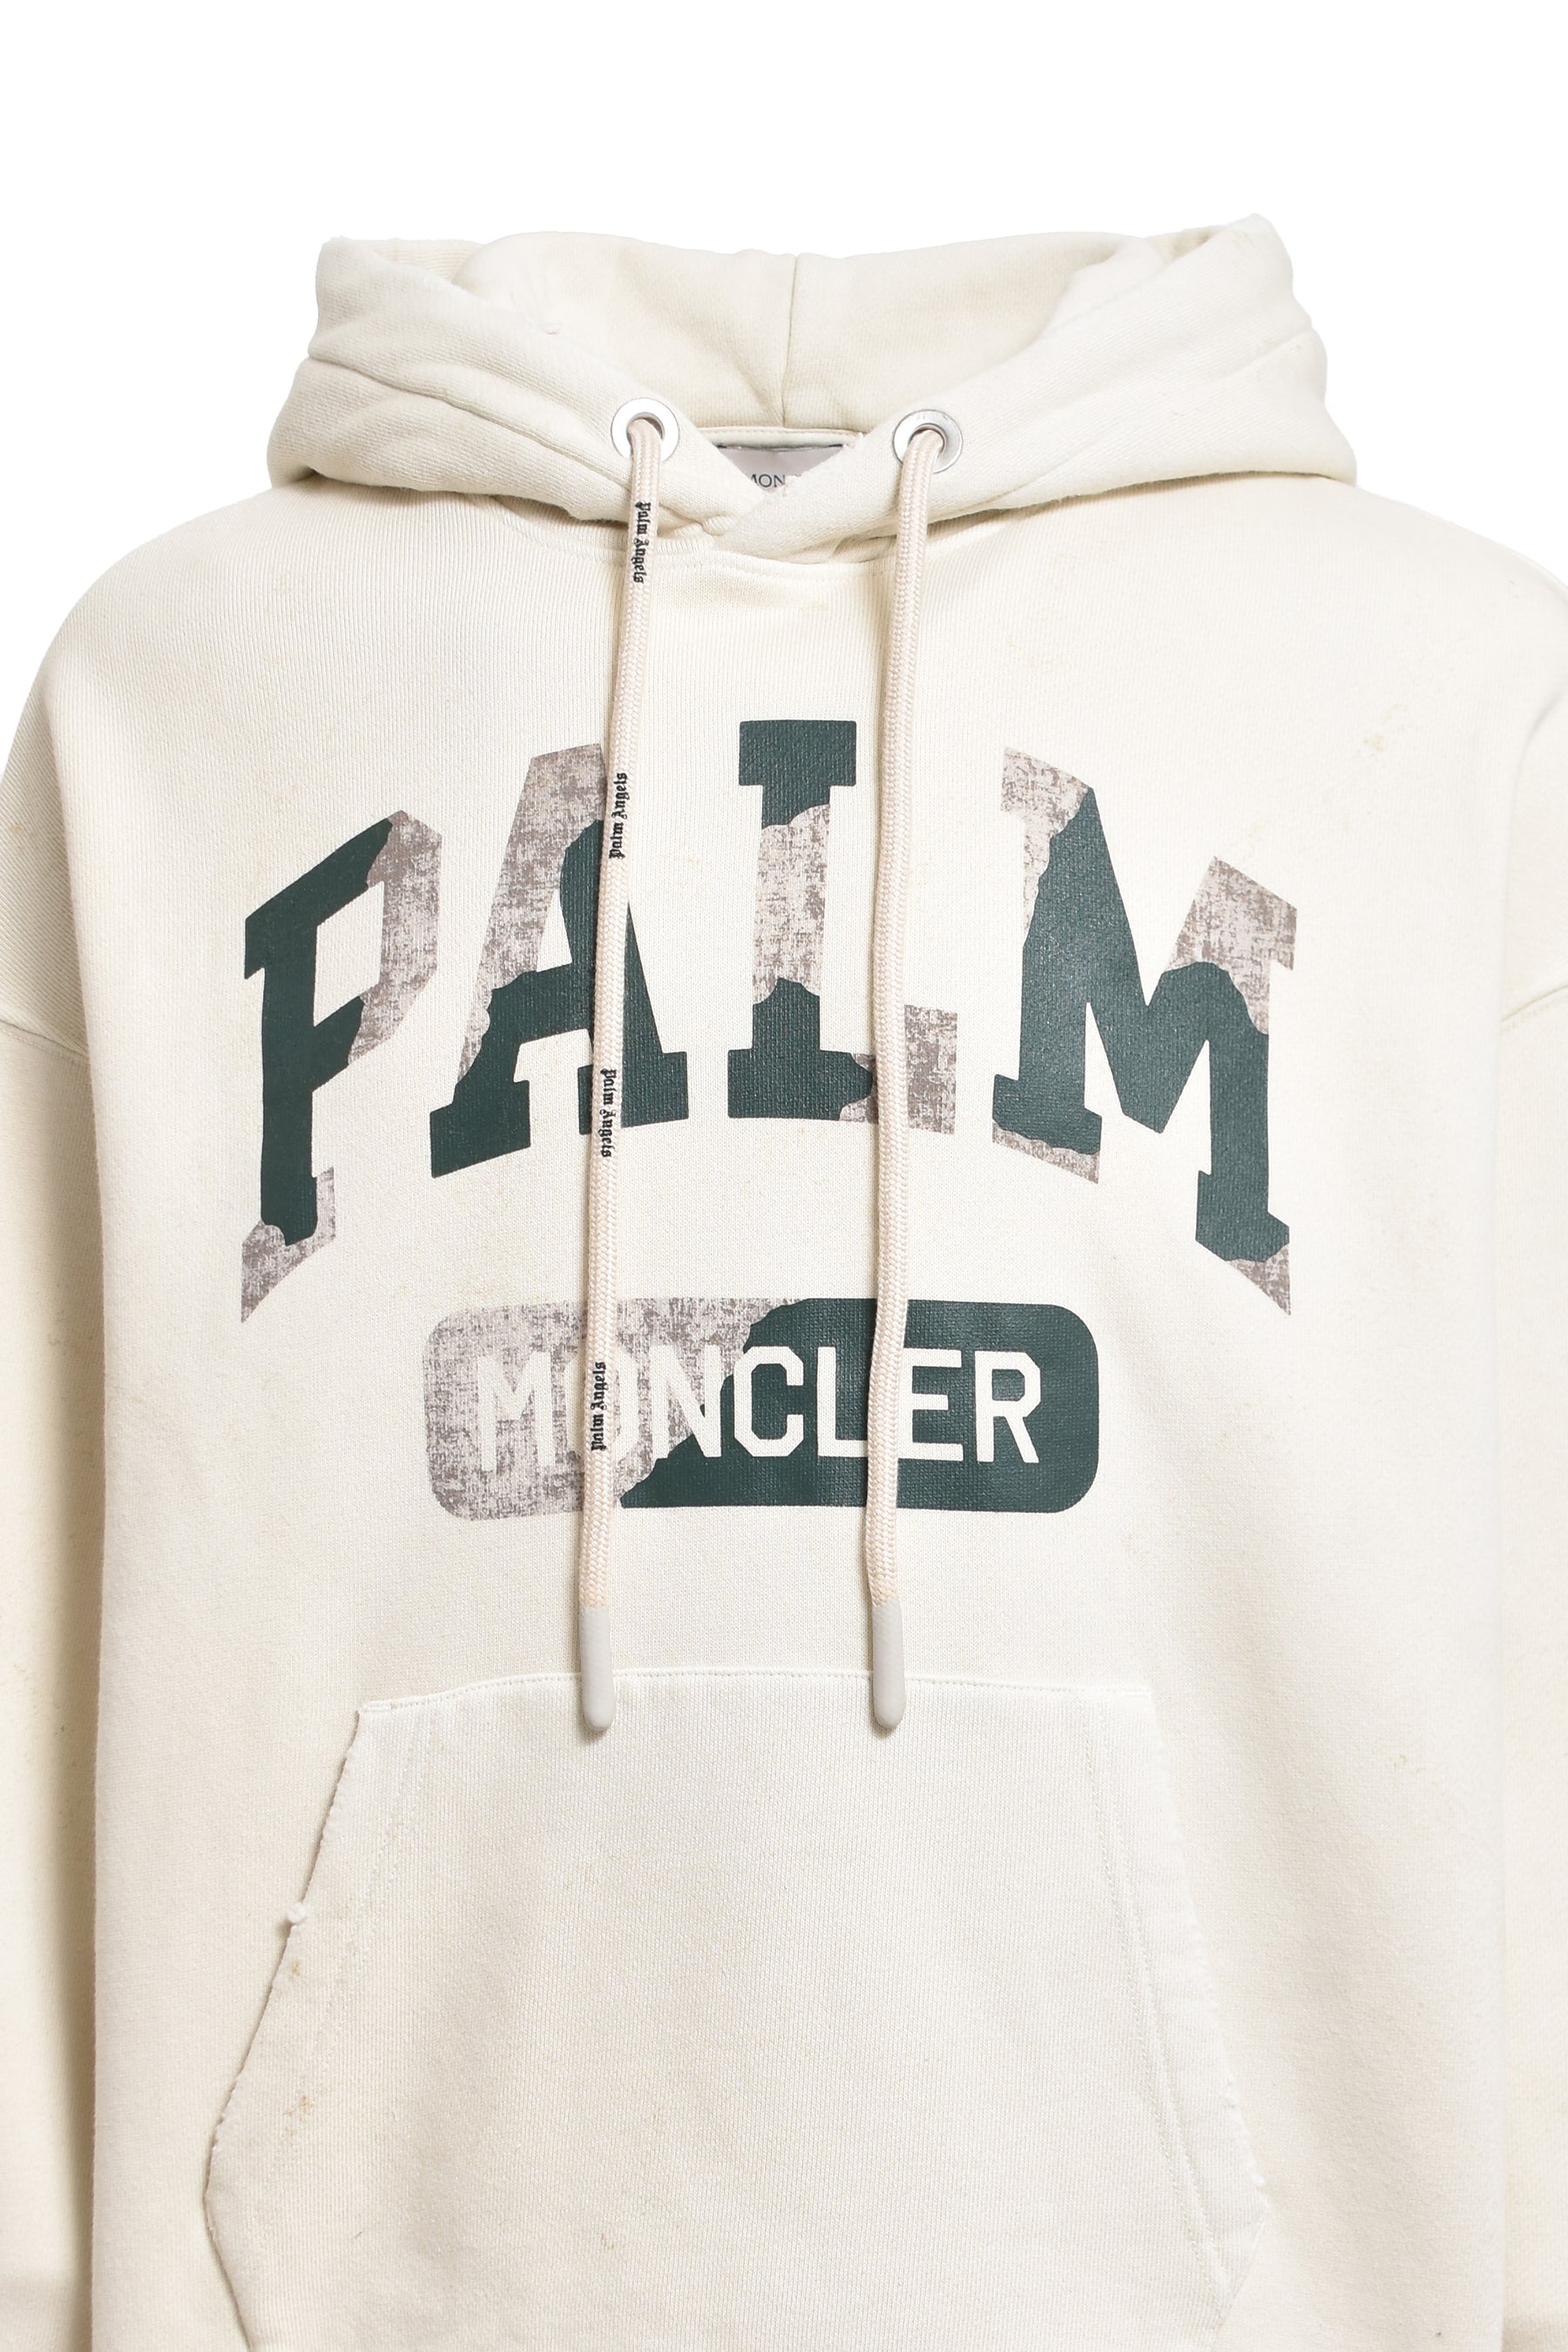 MONCLER × PALM ANGELS HOODIE SWEATER / WHT